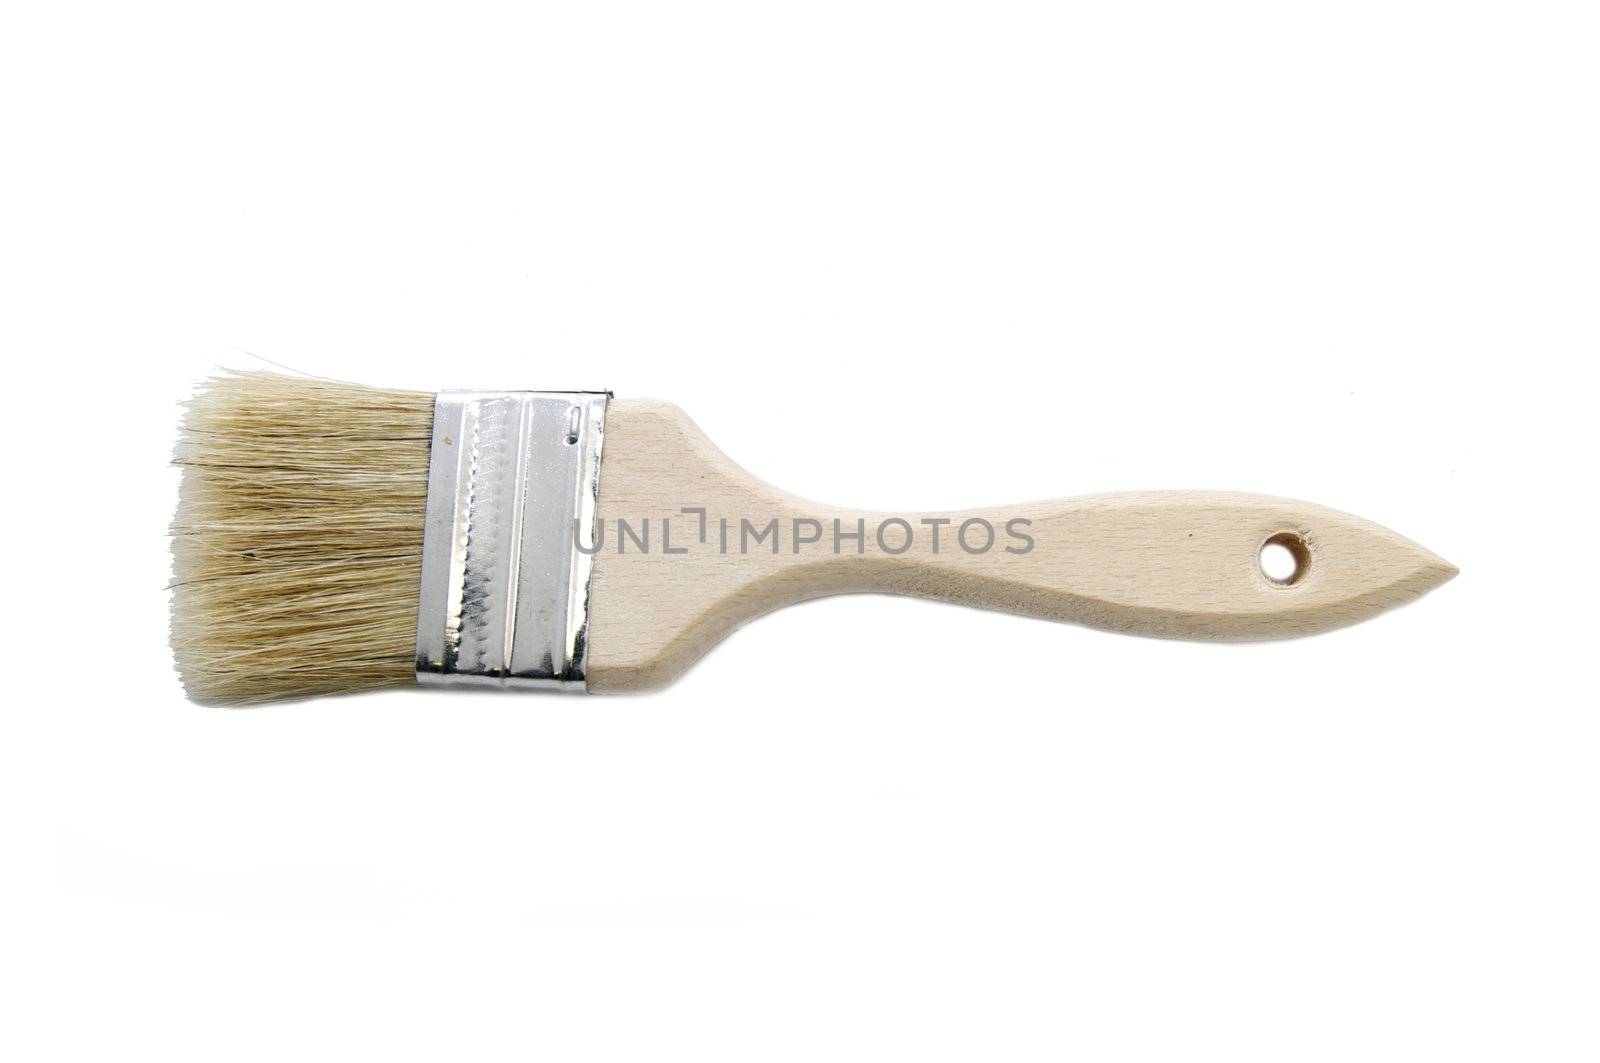 A new brush with wooden brush for painting